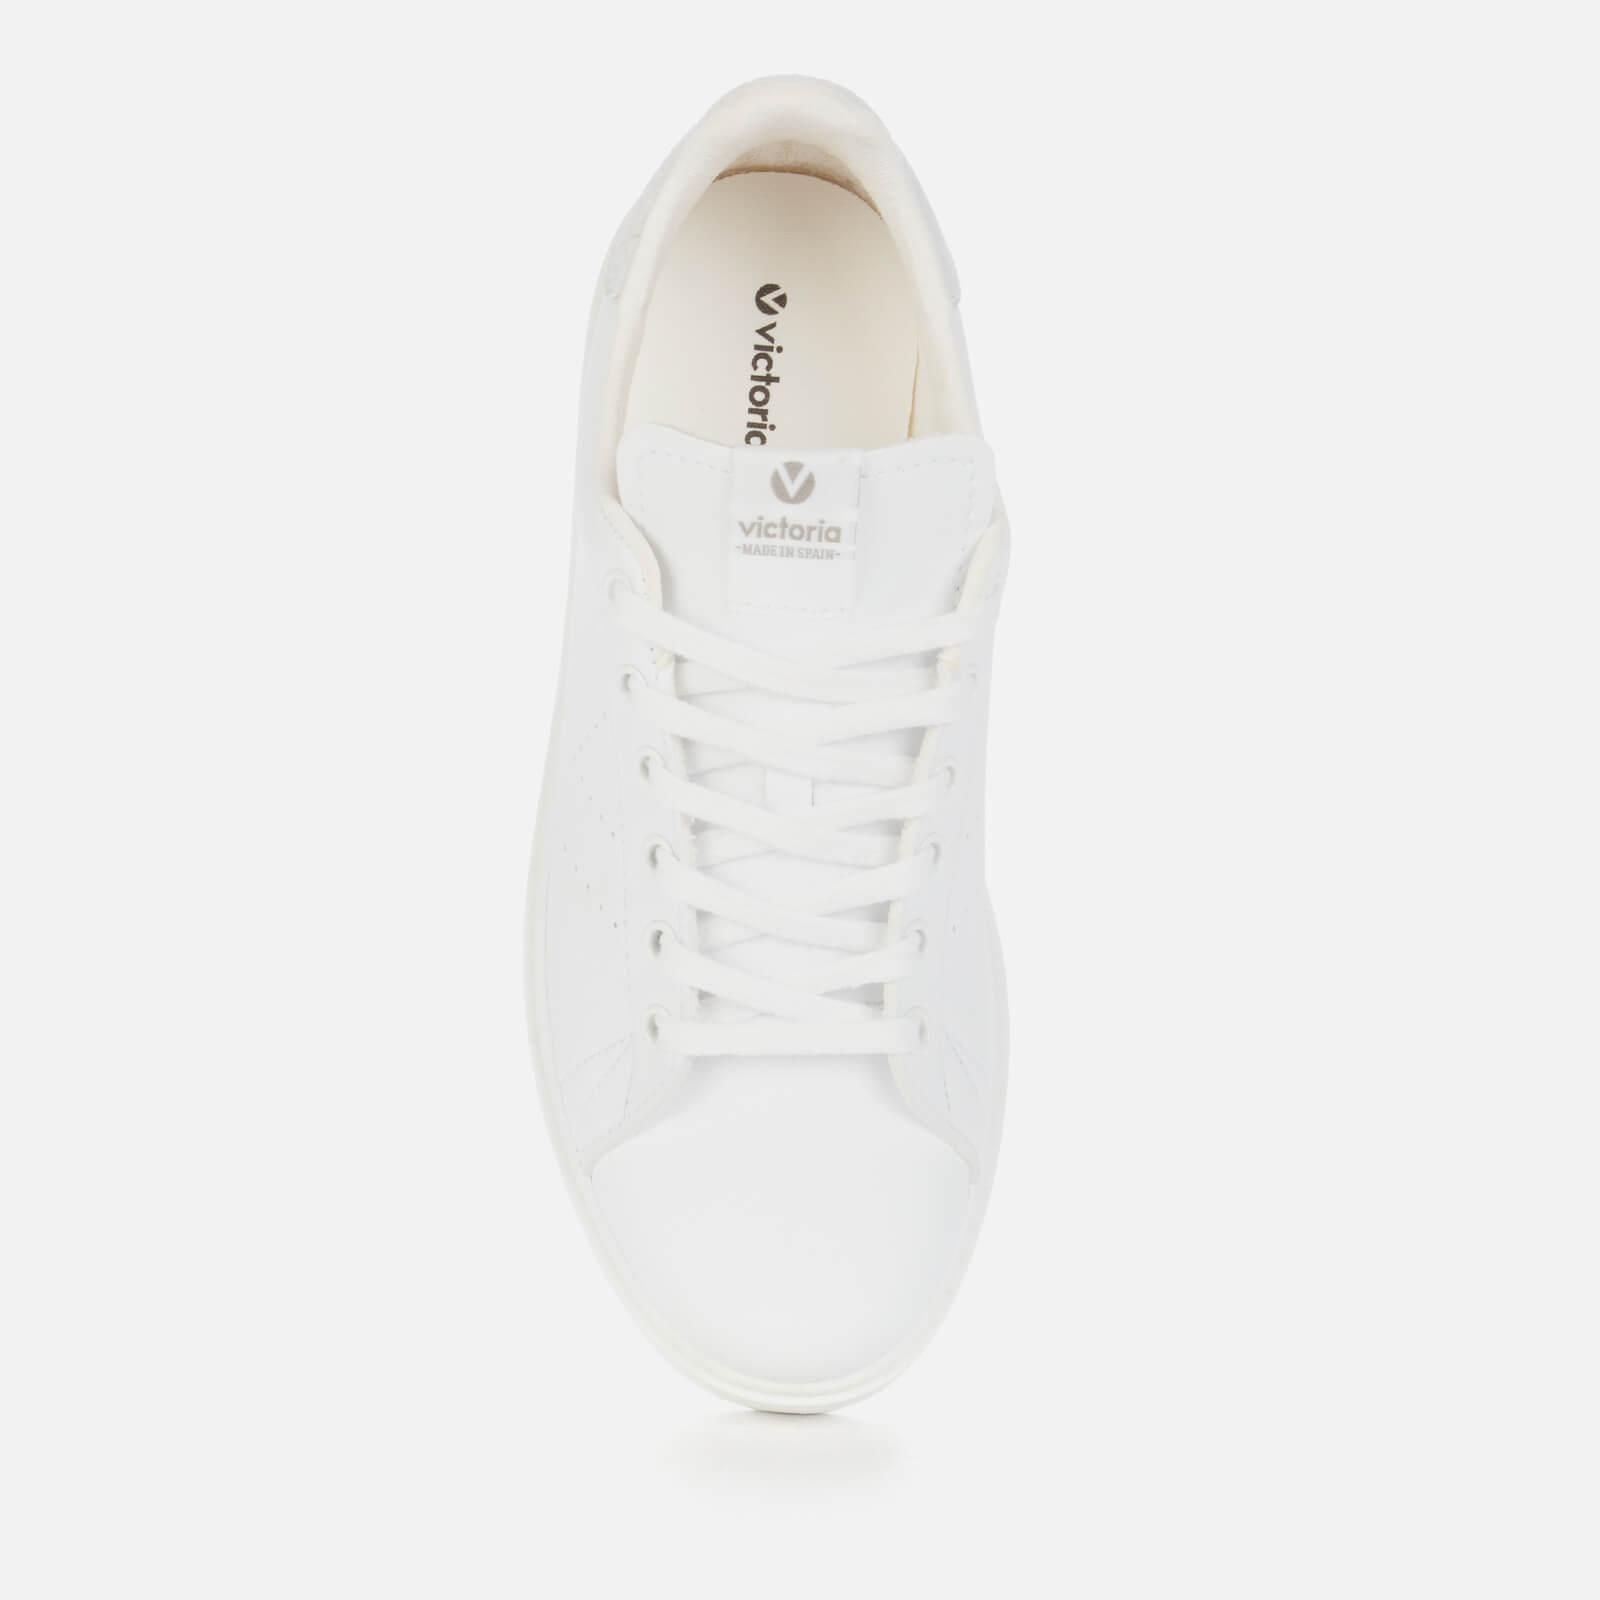 Victoria Utopia Sustainable Flatform Trainers in White | Lyst